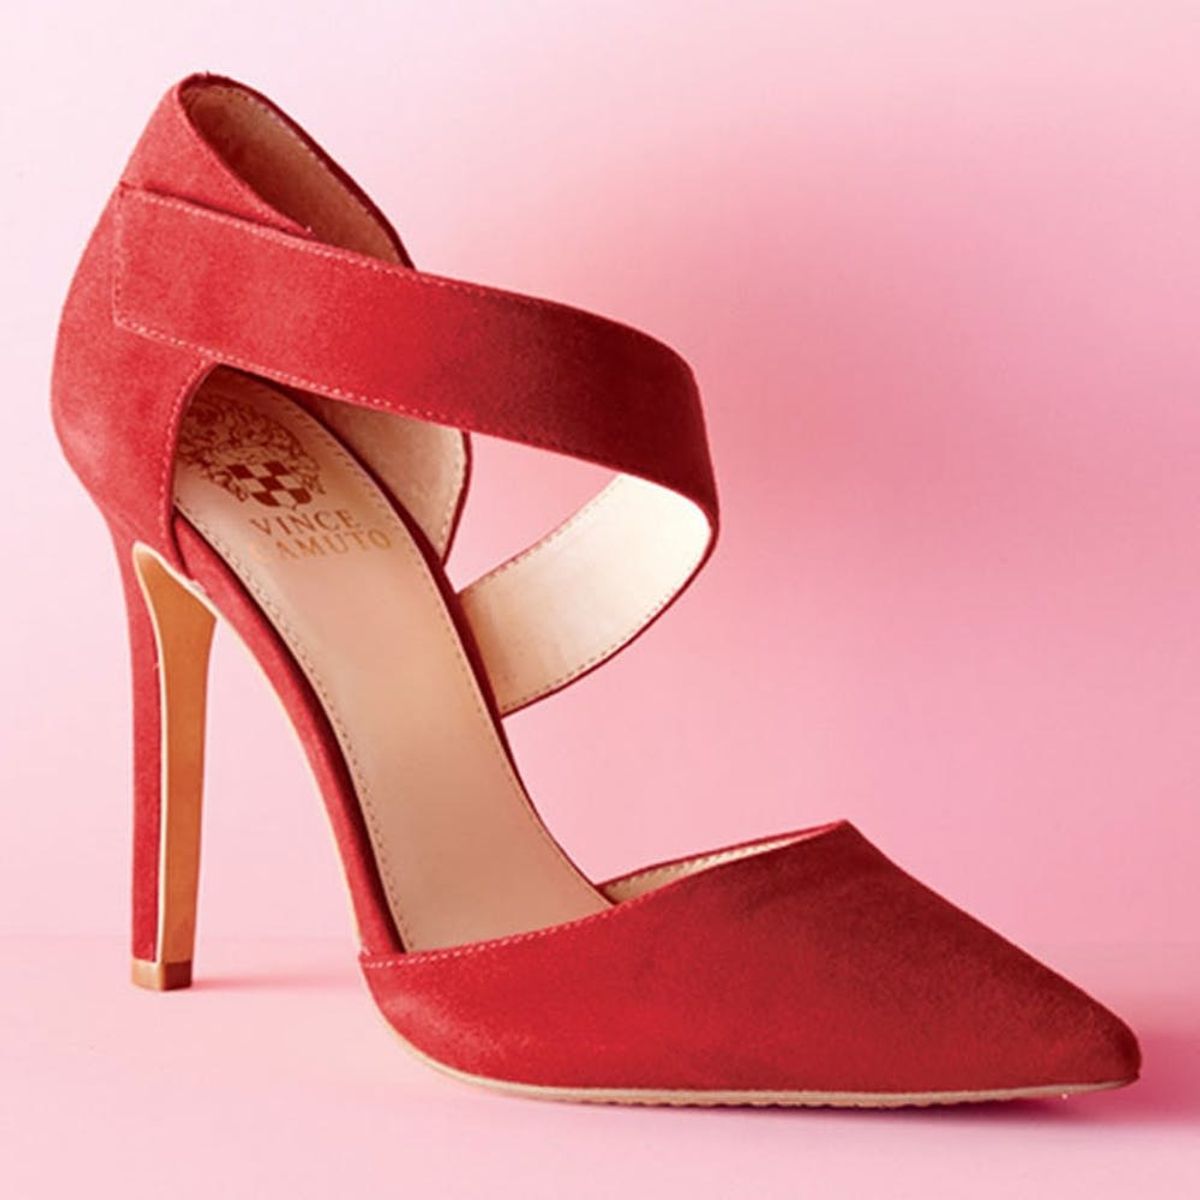 10 Hot Heels Perfect for Valentine’s Day